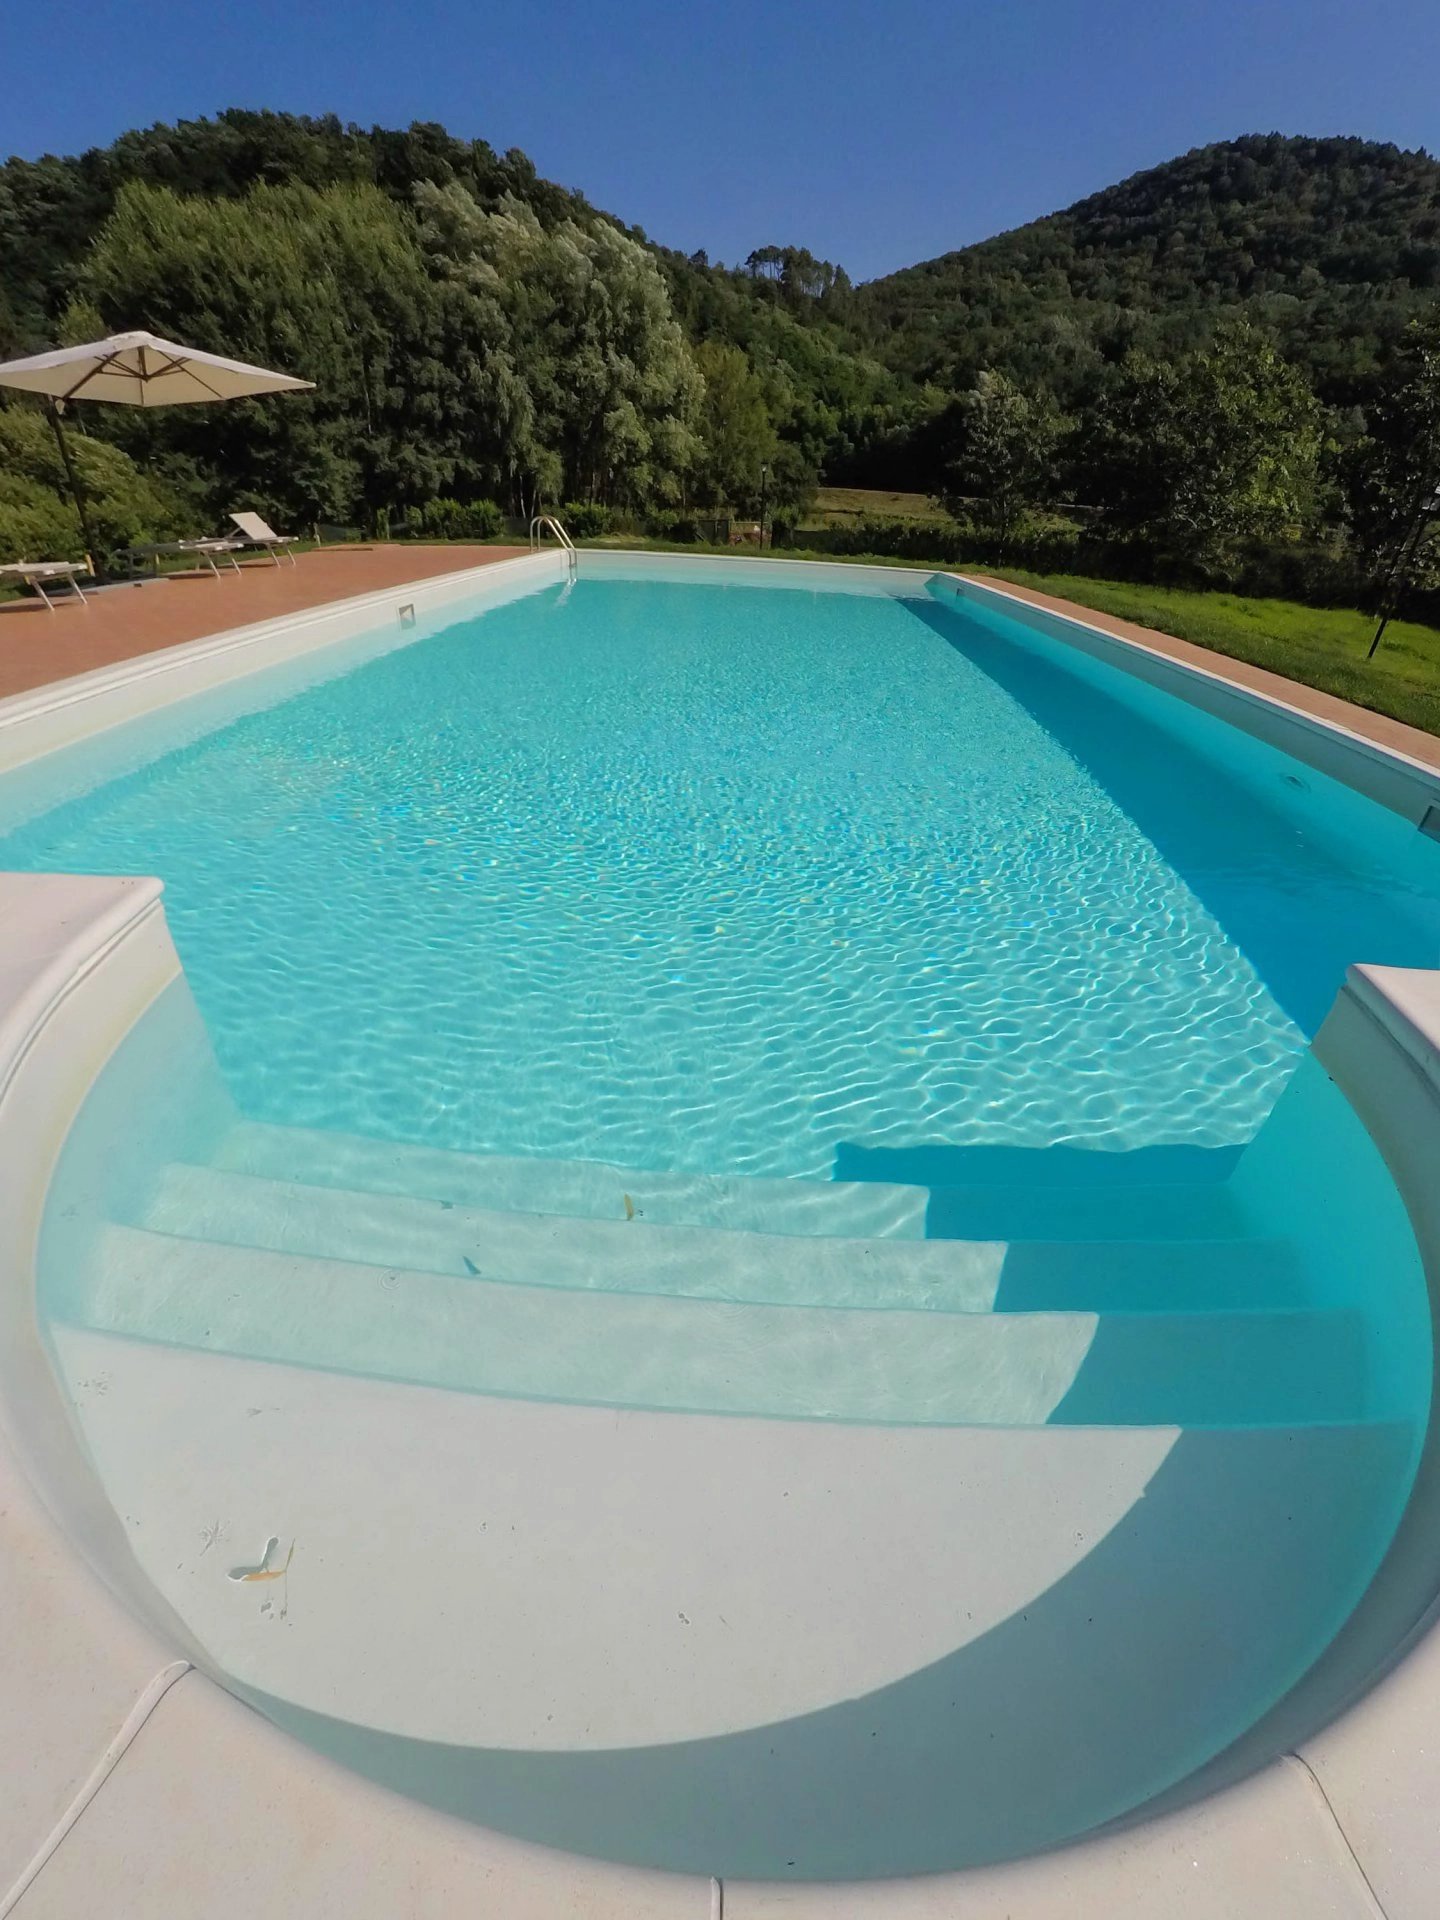 ITALY, TUSCANY, LUCCA, APARTMENT IN VILLA, SHARED POOL, 5 PERSONS, 1 BEDROOM